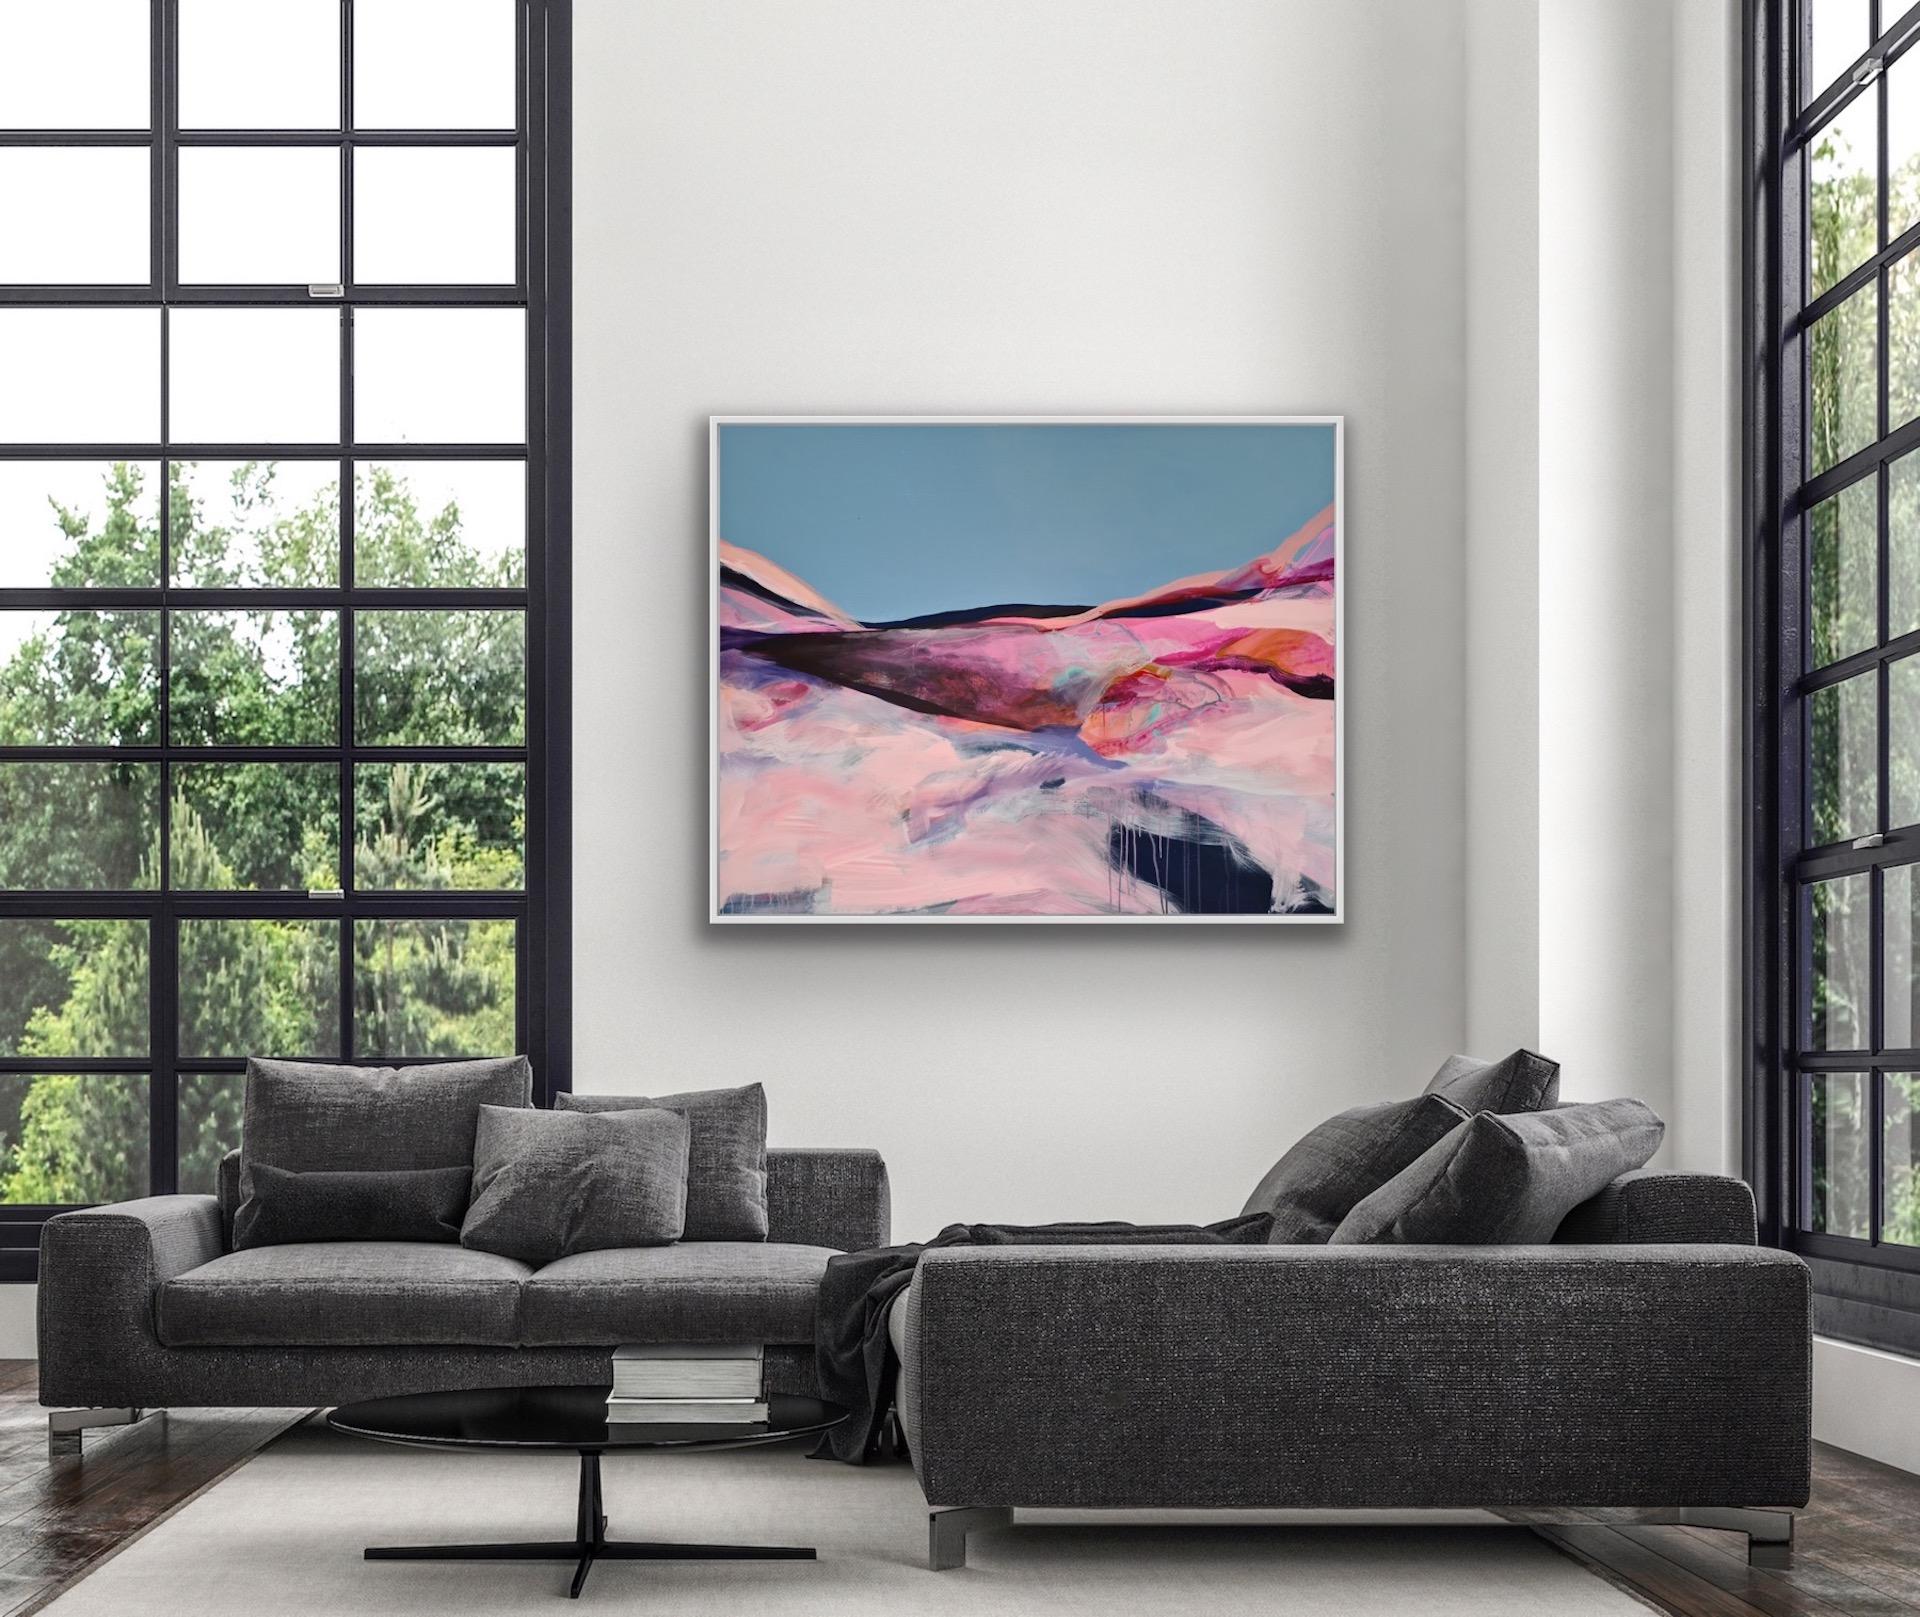 Claire Chandler
Dreamscape
Original Abstract Painting on Canvas
Image Size: H 127cm x W 157cm
Sold Unframed
(Please note that in situ images are purely an indication of how a piece may look).

Claire Chandler was born in Hereford yet spent much of